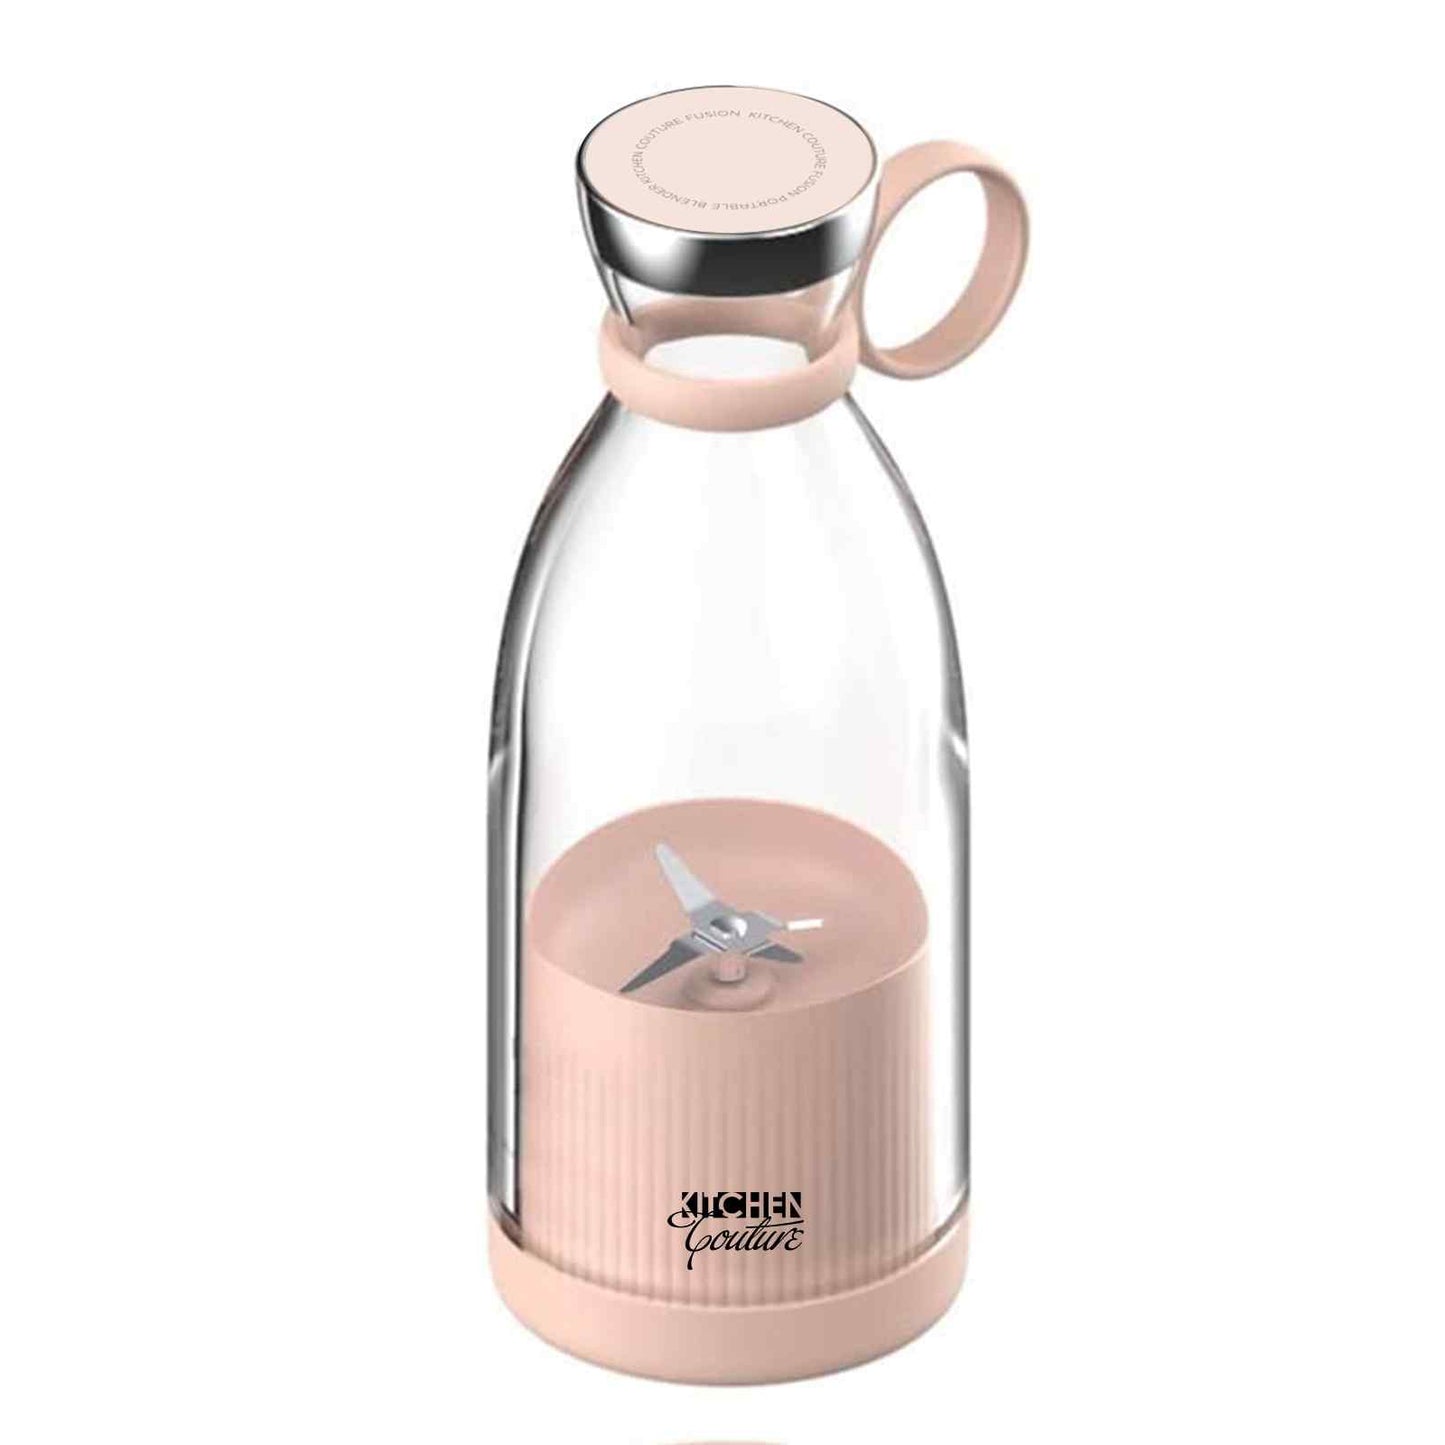 Portable Electric Blender Kitchen Couture Fusion  - Pink